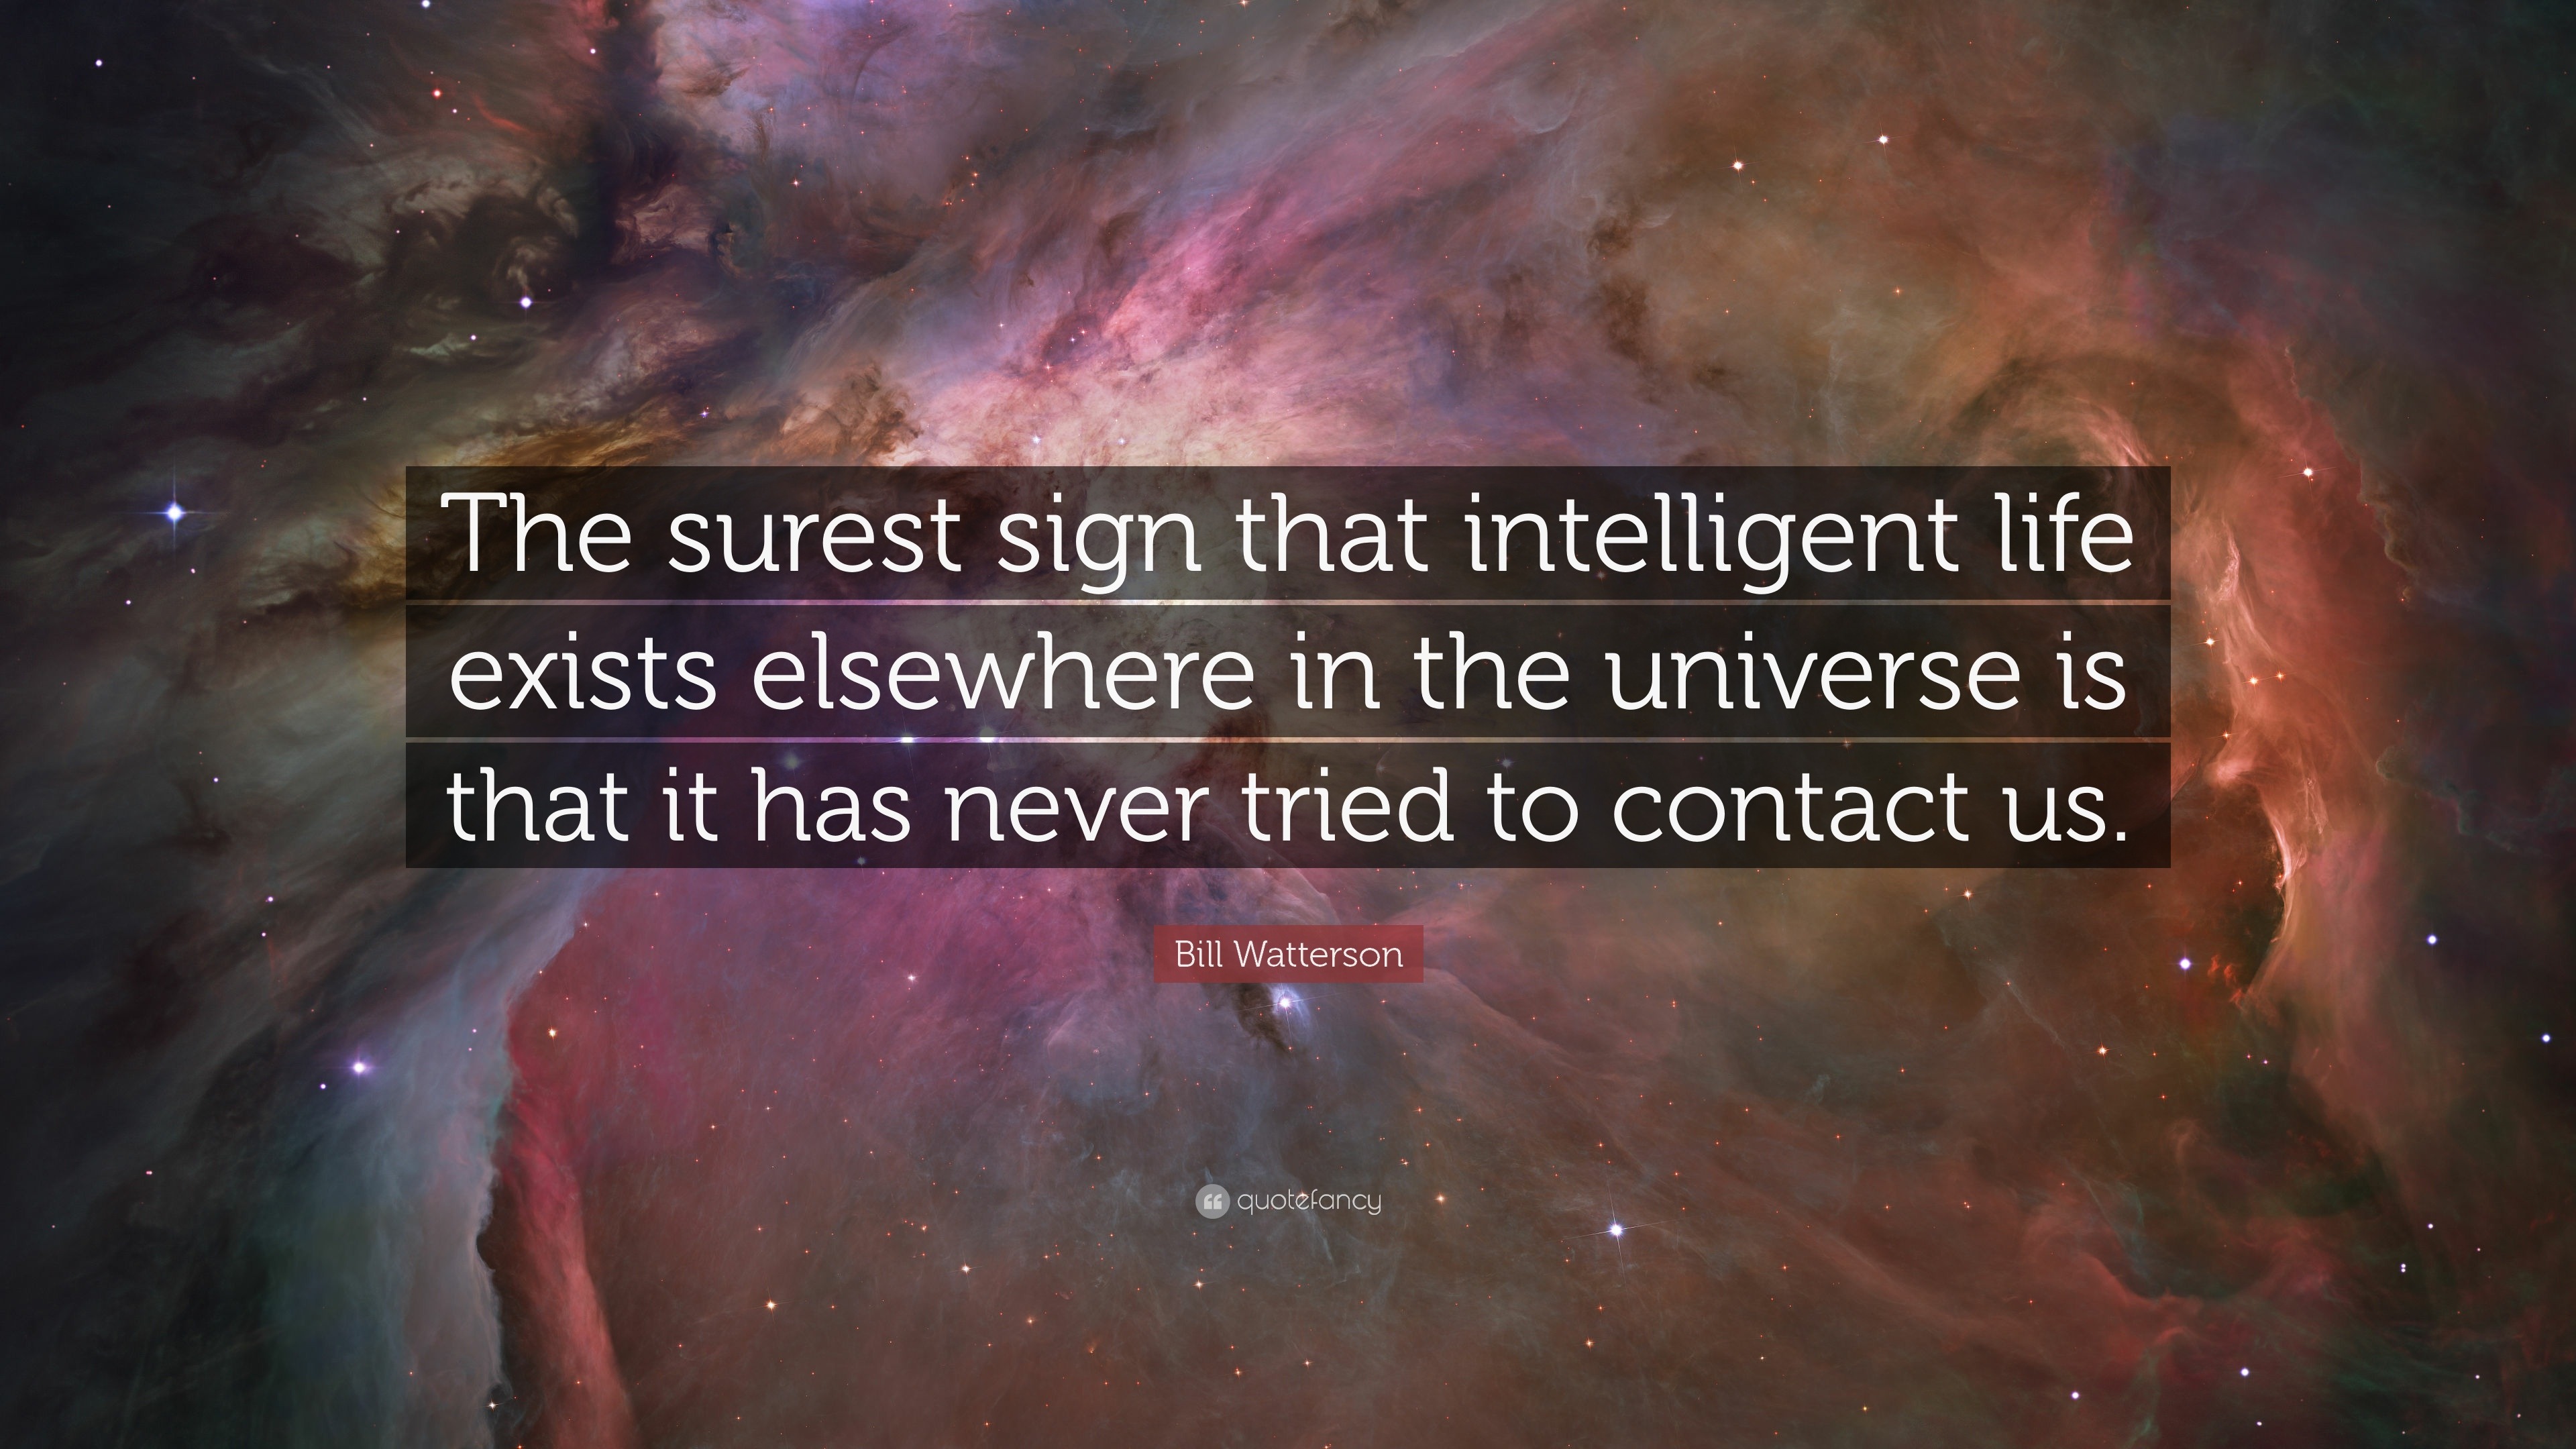 Space Quotes “The surest sign that intelligent life exists elsewhere in the universe is